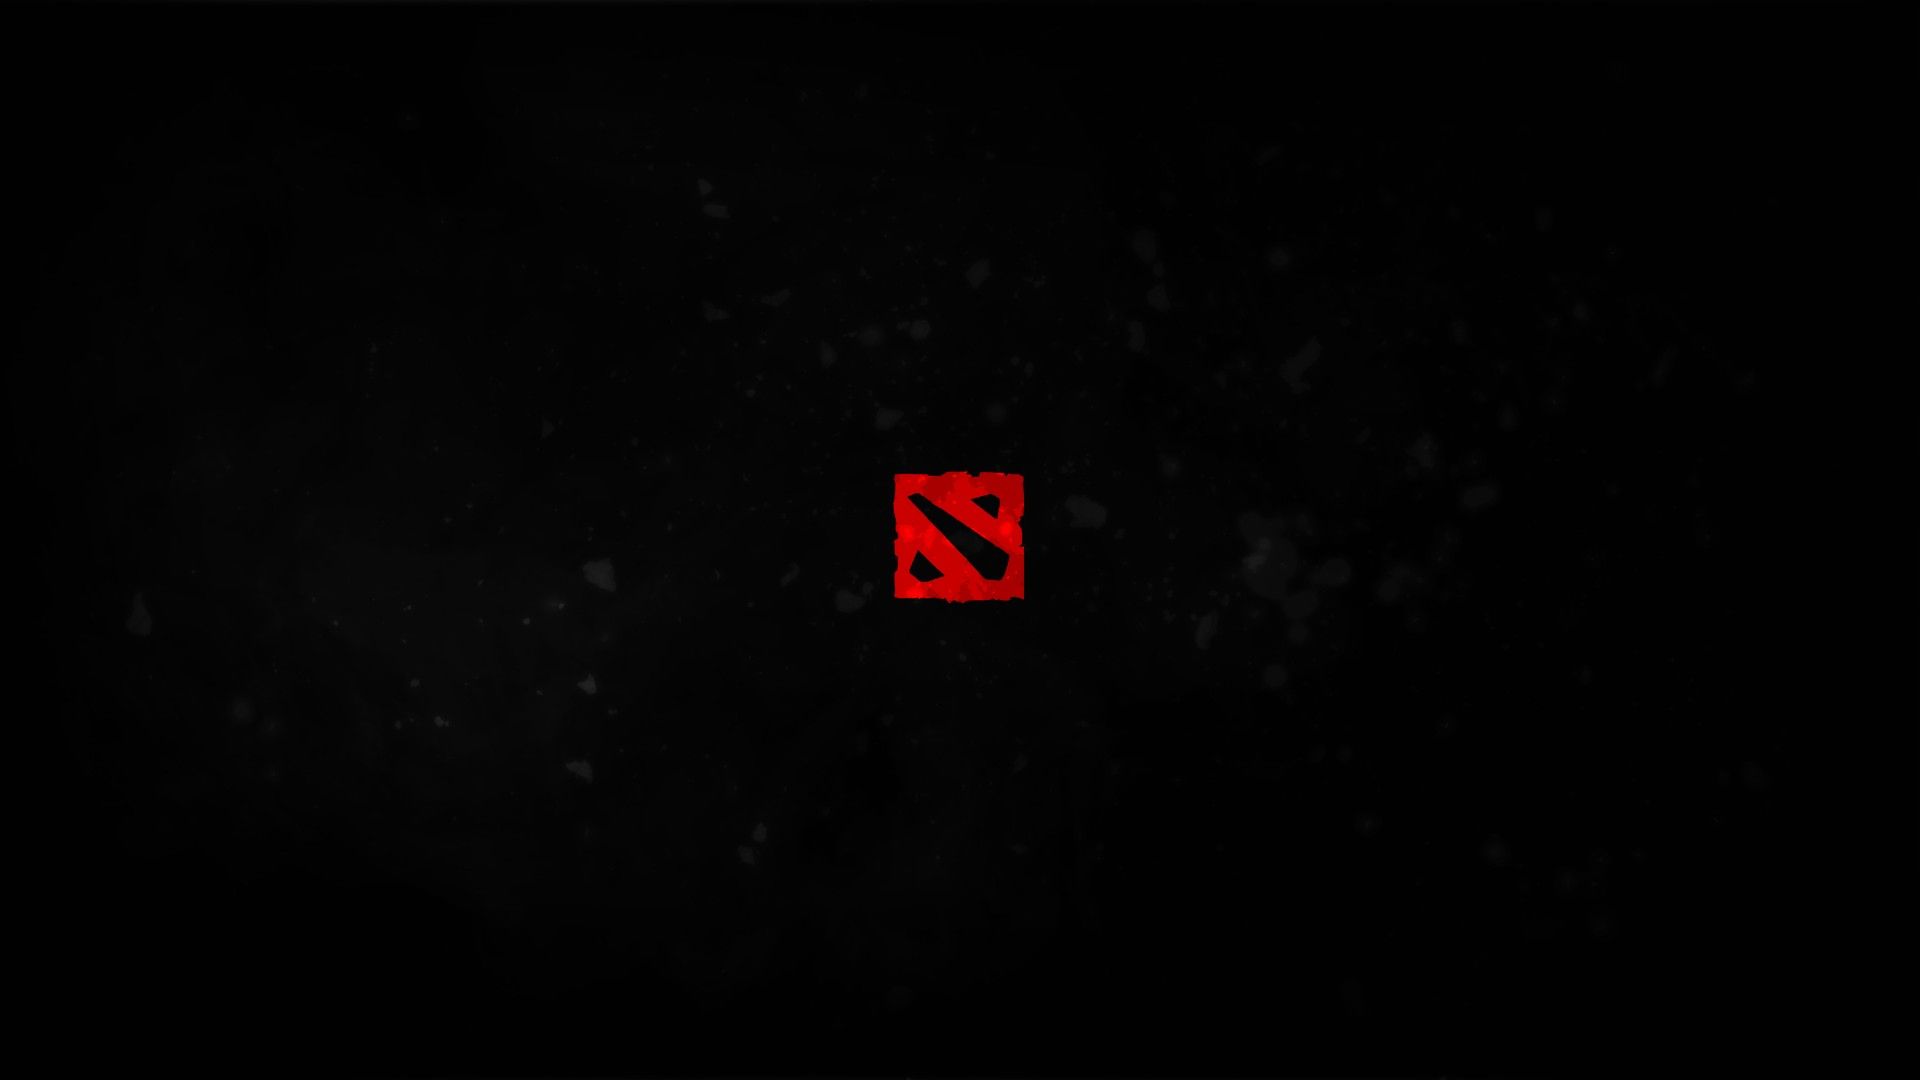 Dota 2, Moba, PC Gaming Wallpapers HD / Desktop and Mobile Backgrounds